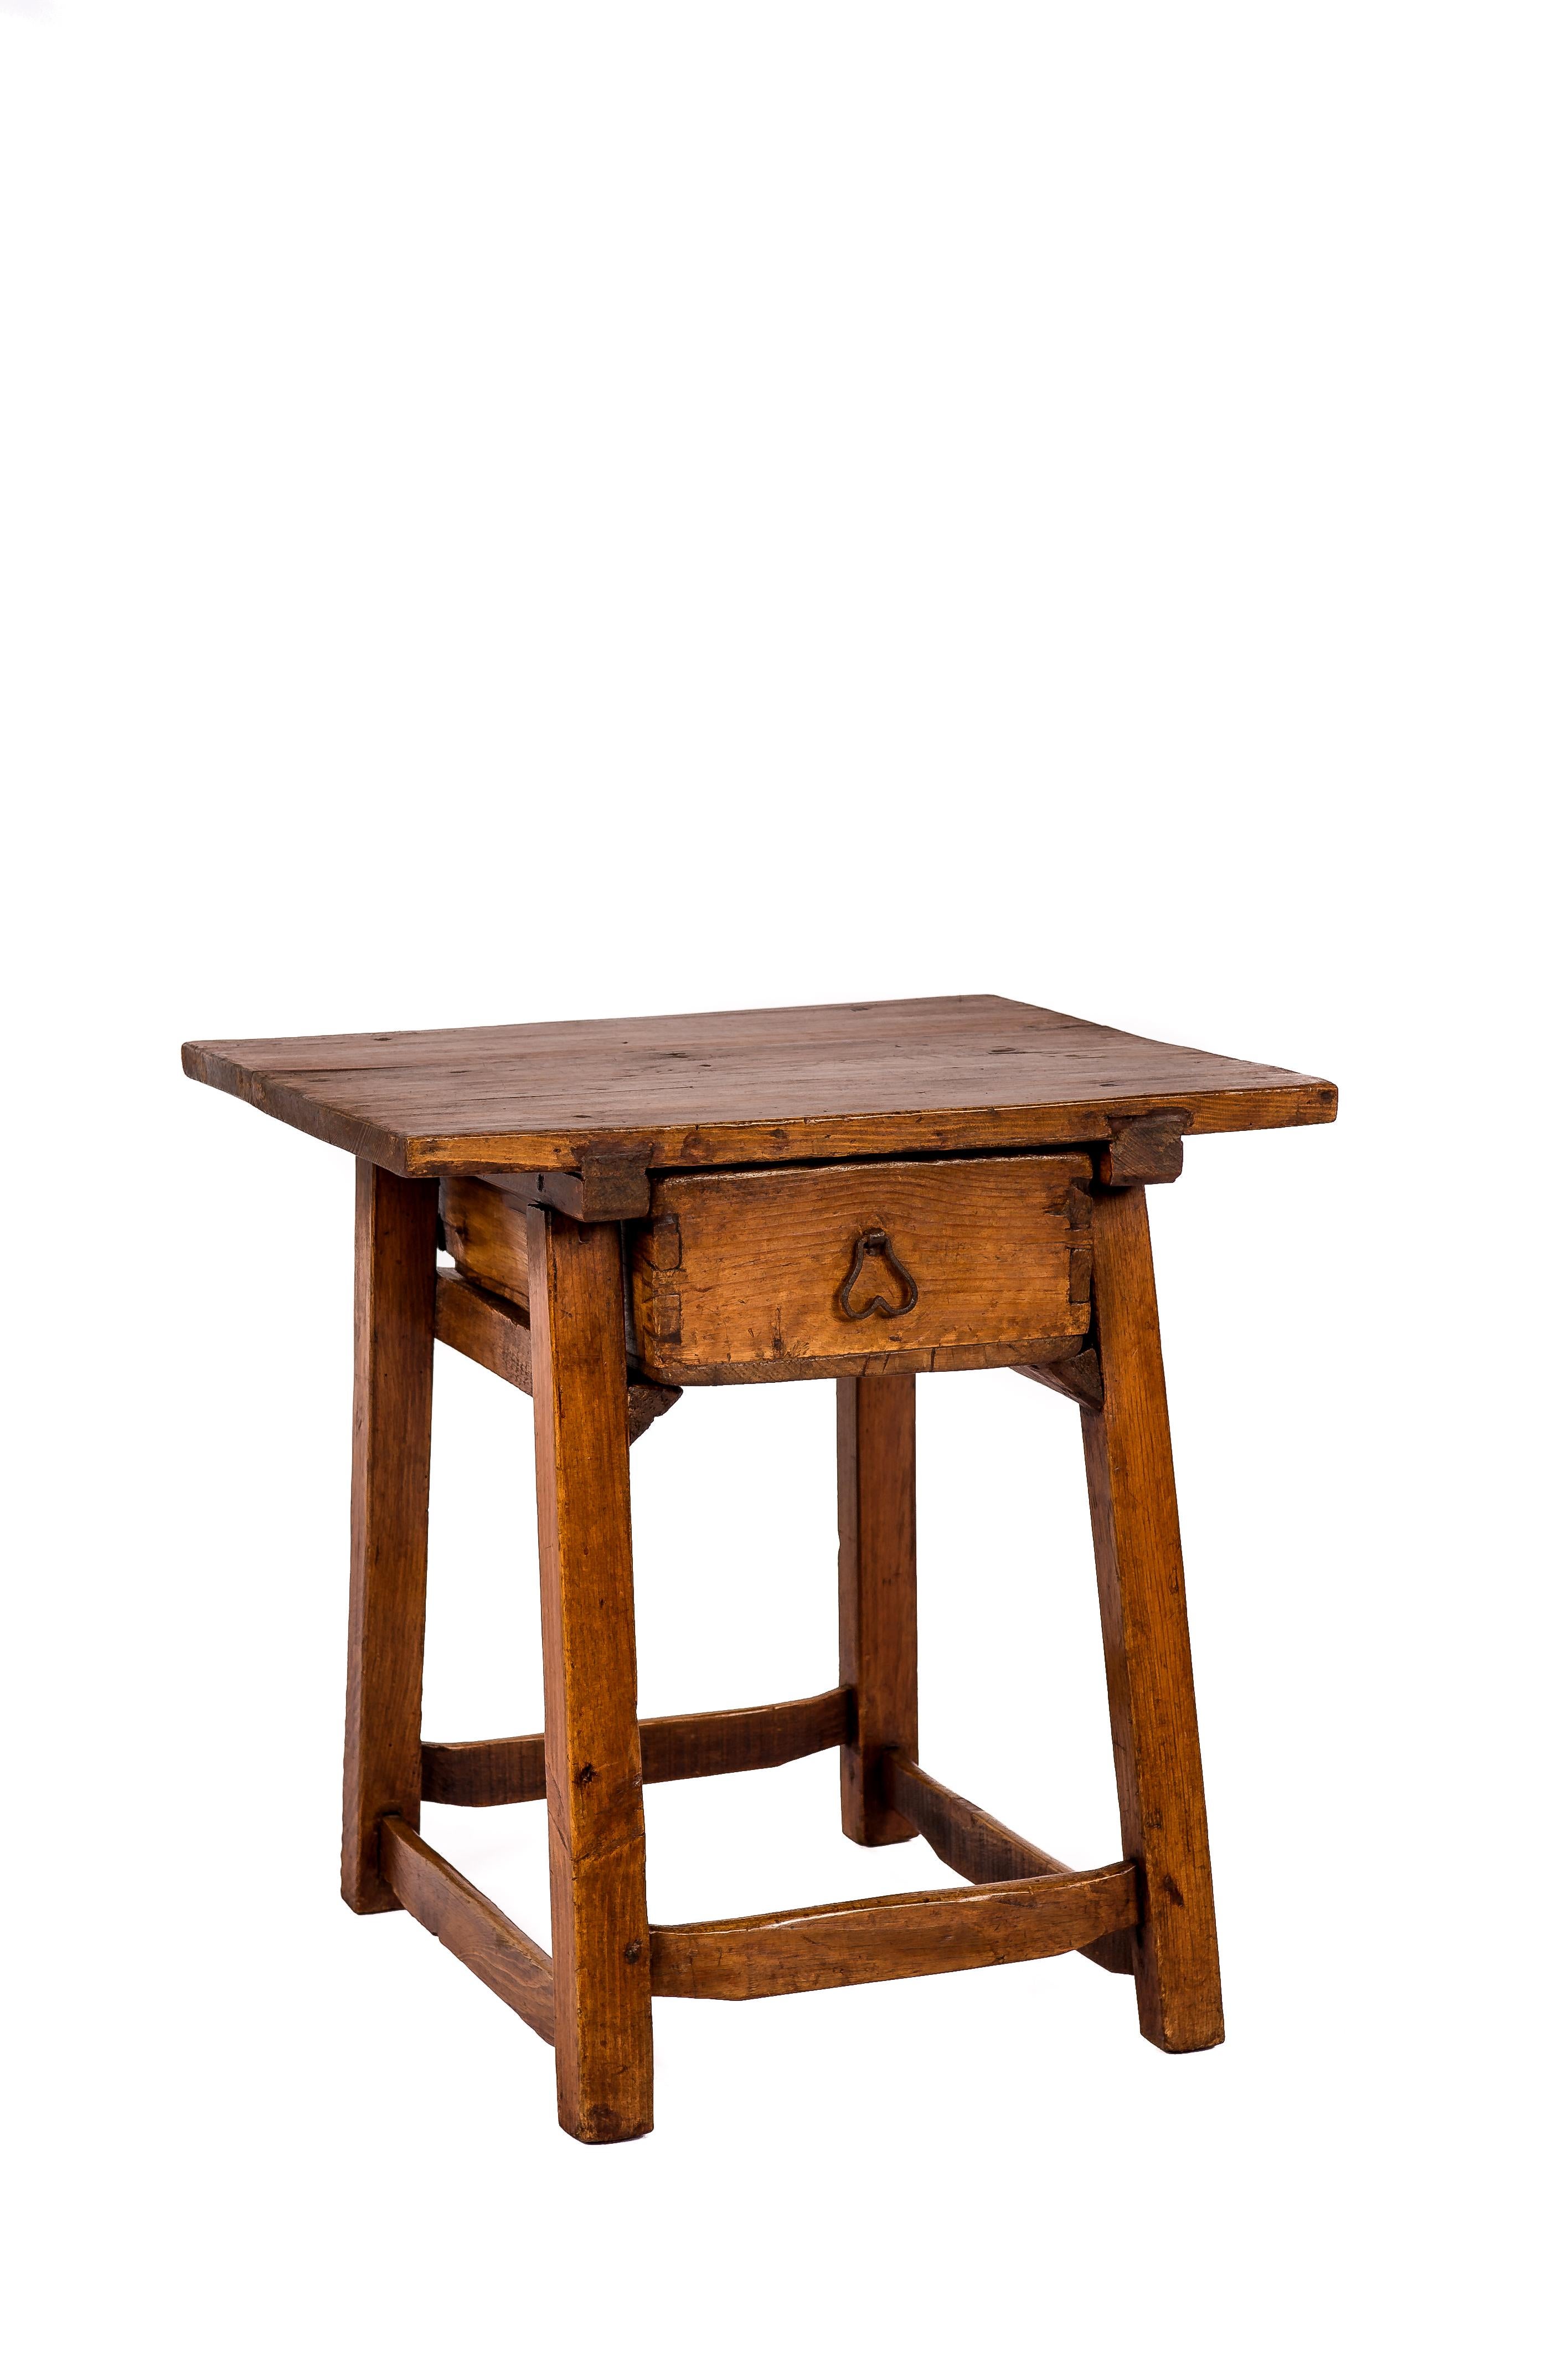 A fantastic antique side table or occasional table that was made in rural Spain circa 1750. The rectangular top was made from two boards of solid elm wood and was jointed to the base by classic dovetail stretchers. The table features a drawer with a